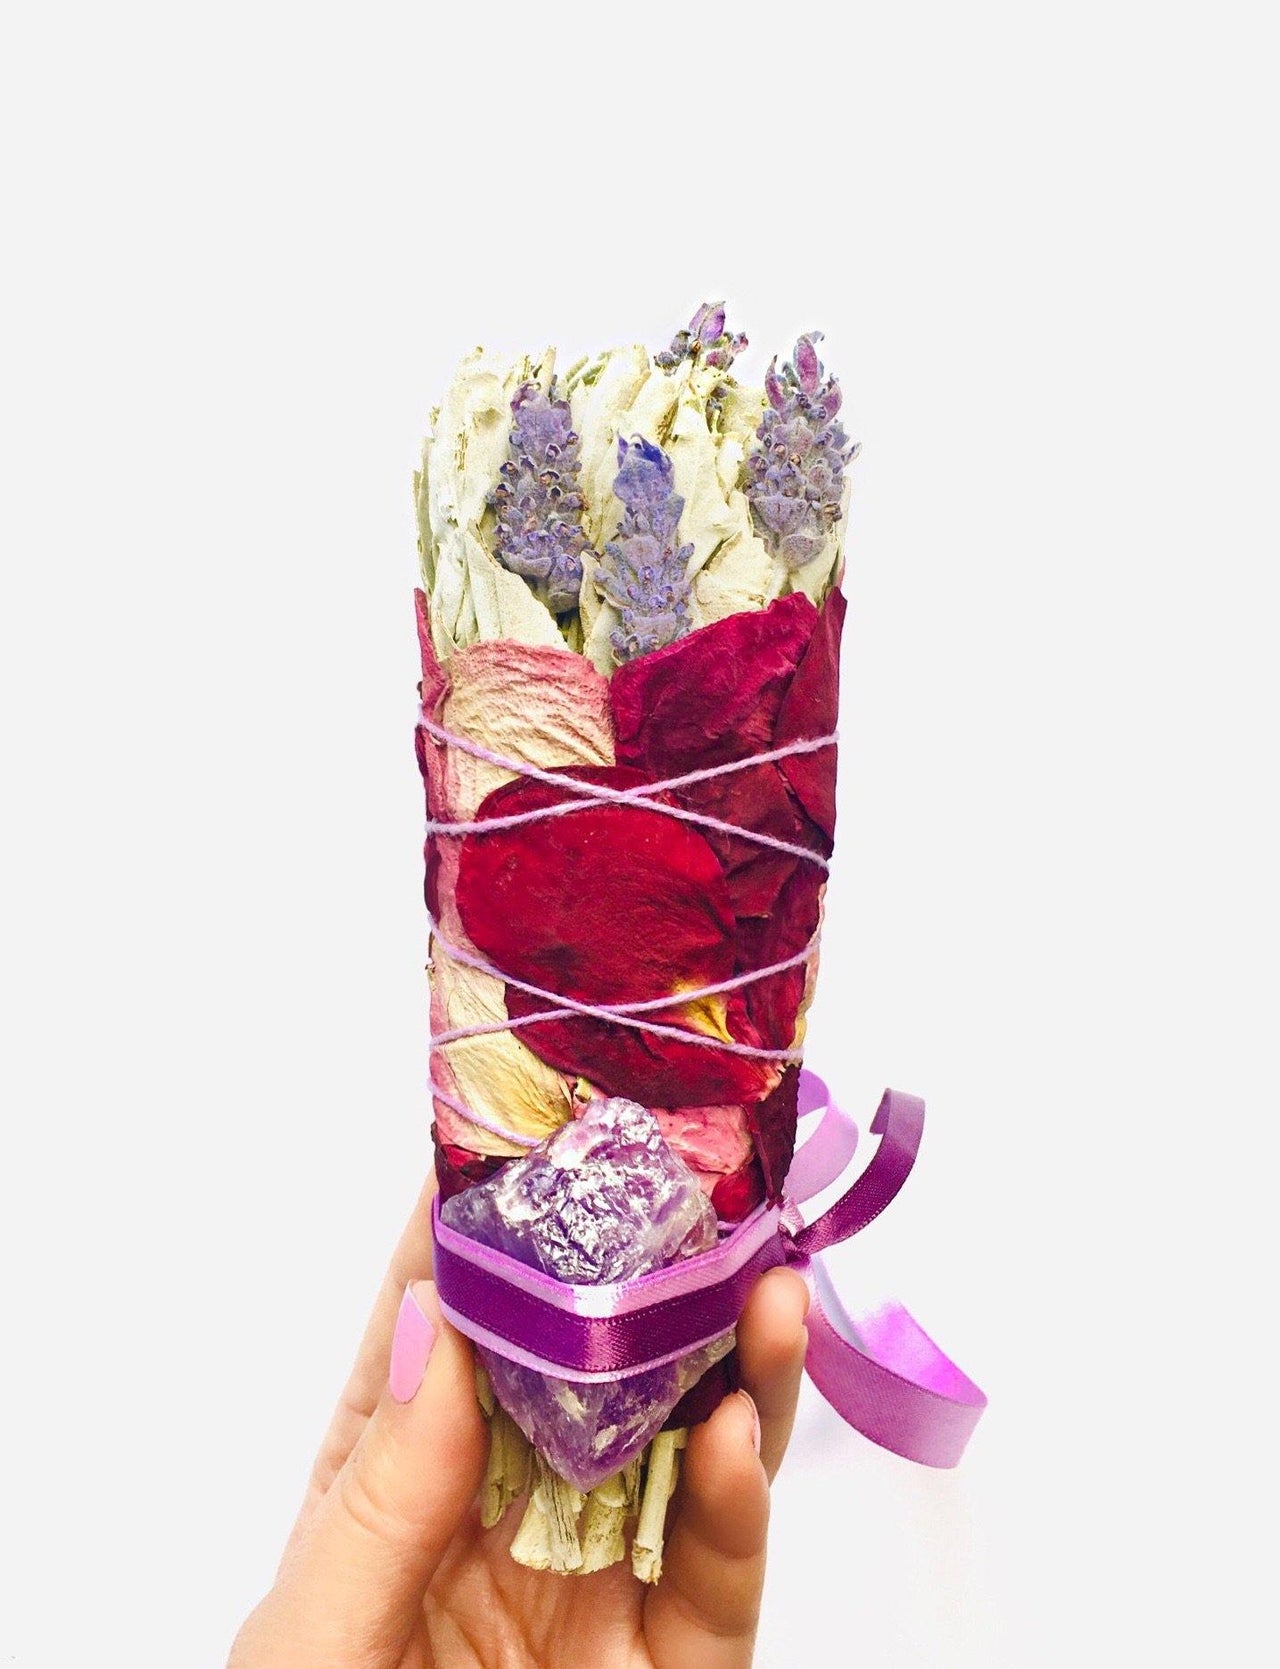 Peace - Large Lavender & Sage Smudge Stick Bouquet with Raw Amethyst - Sentient Creations